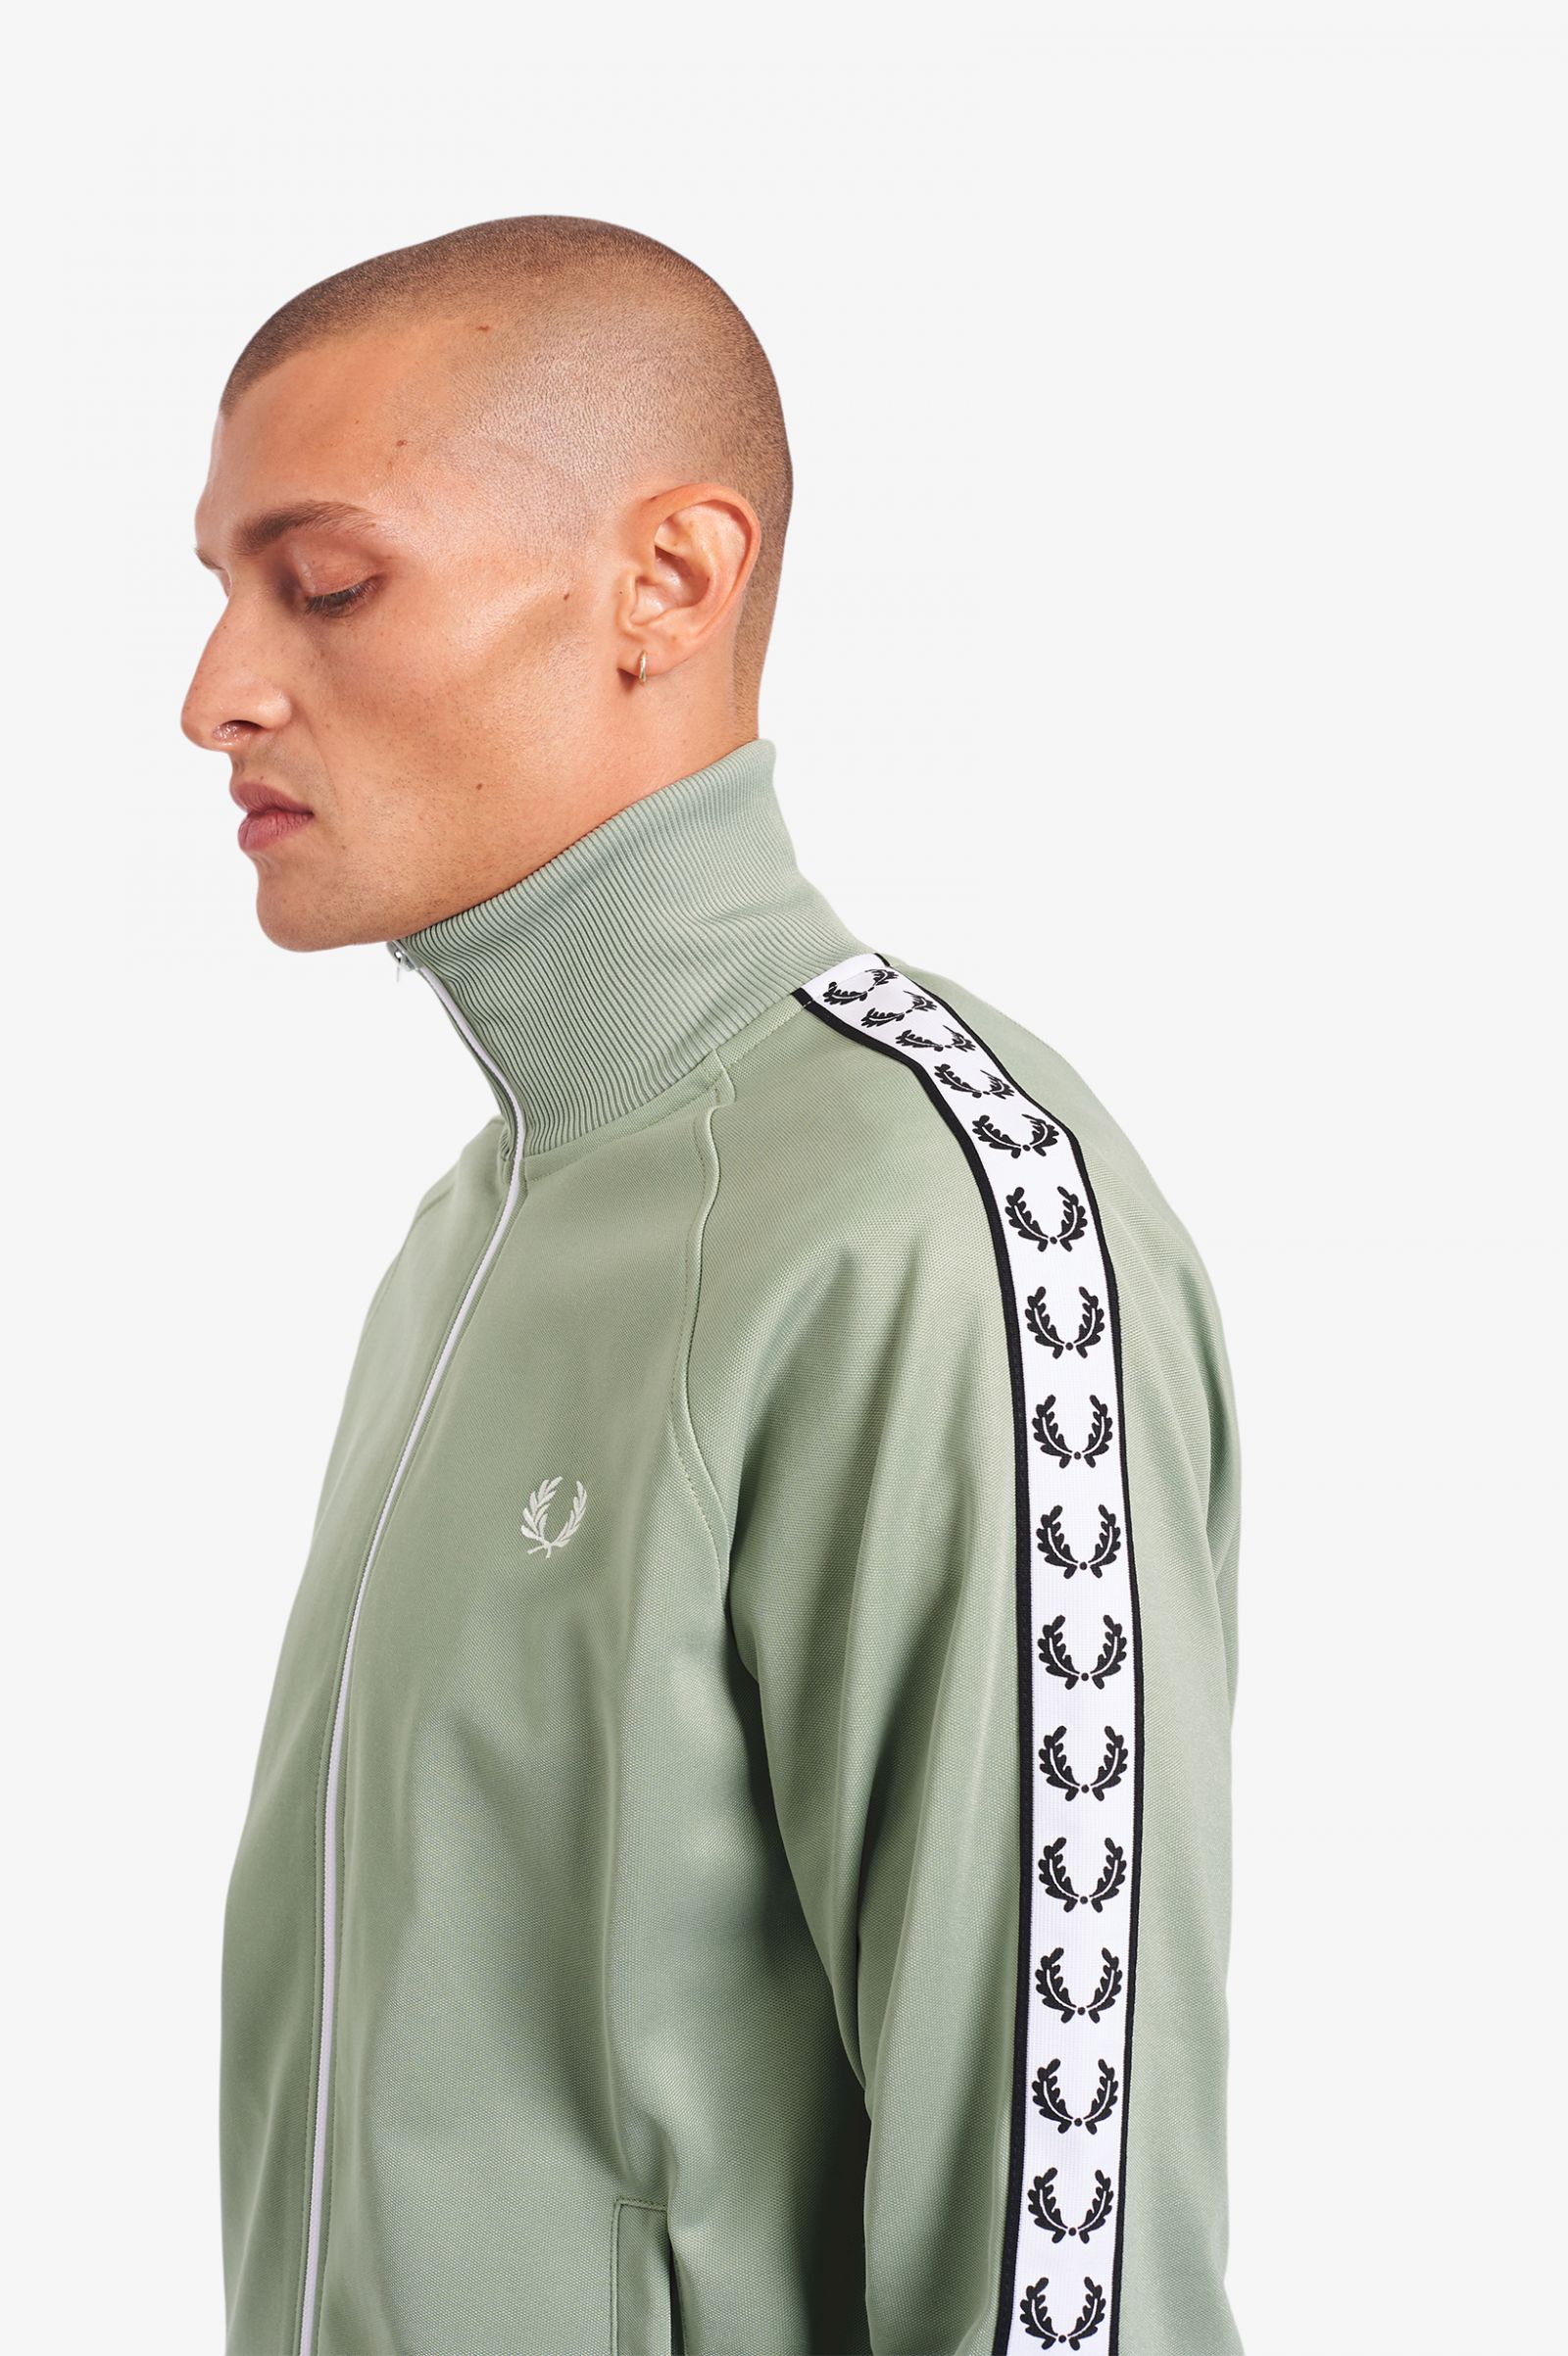 Taped Track Jacket - Seagrass | Men's Track Jackets | Track Tops 